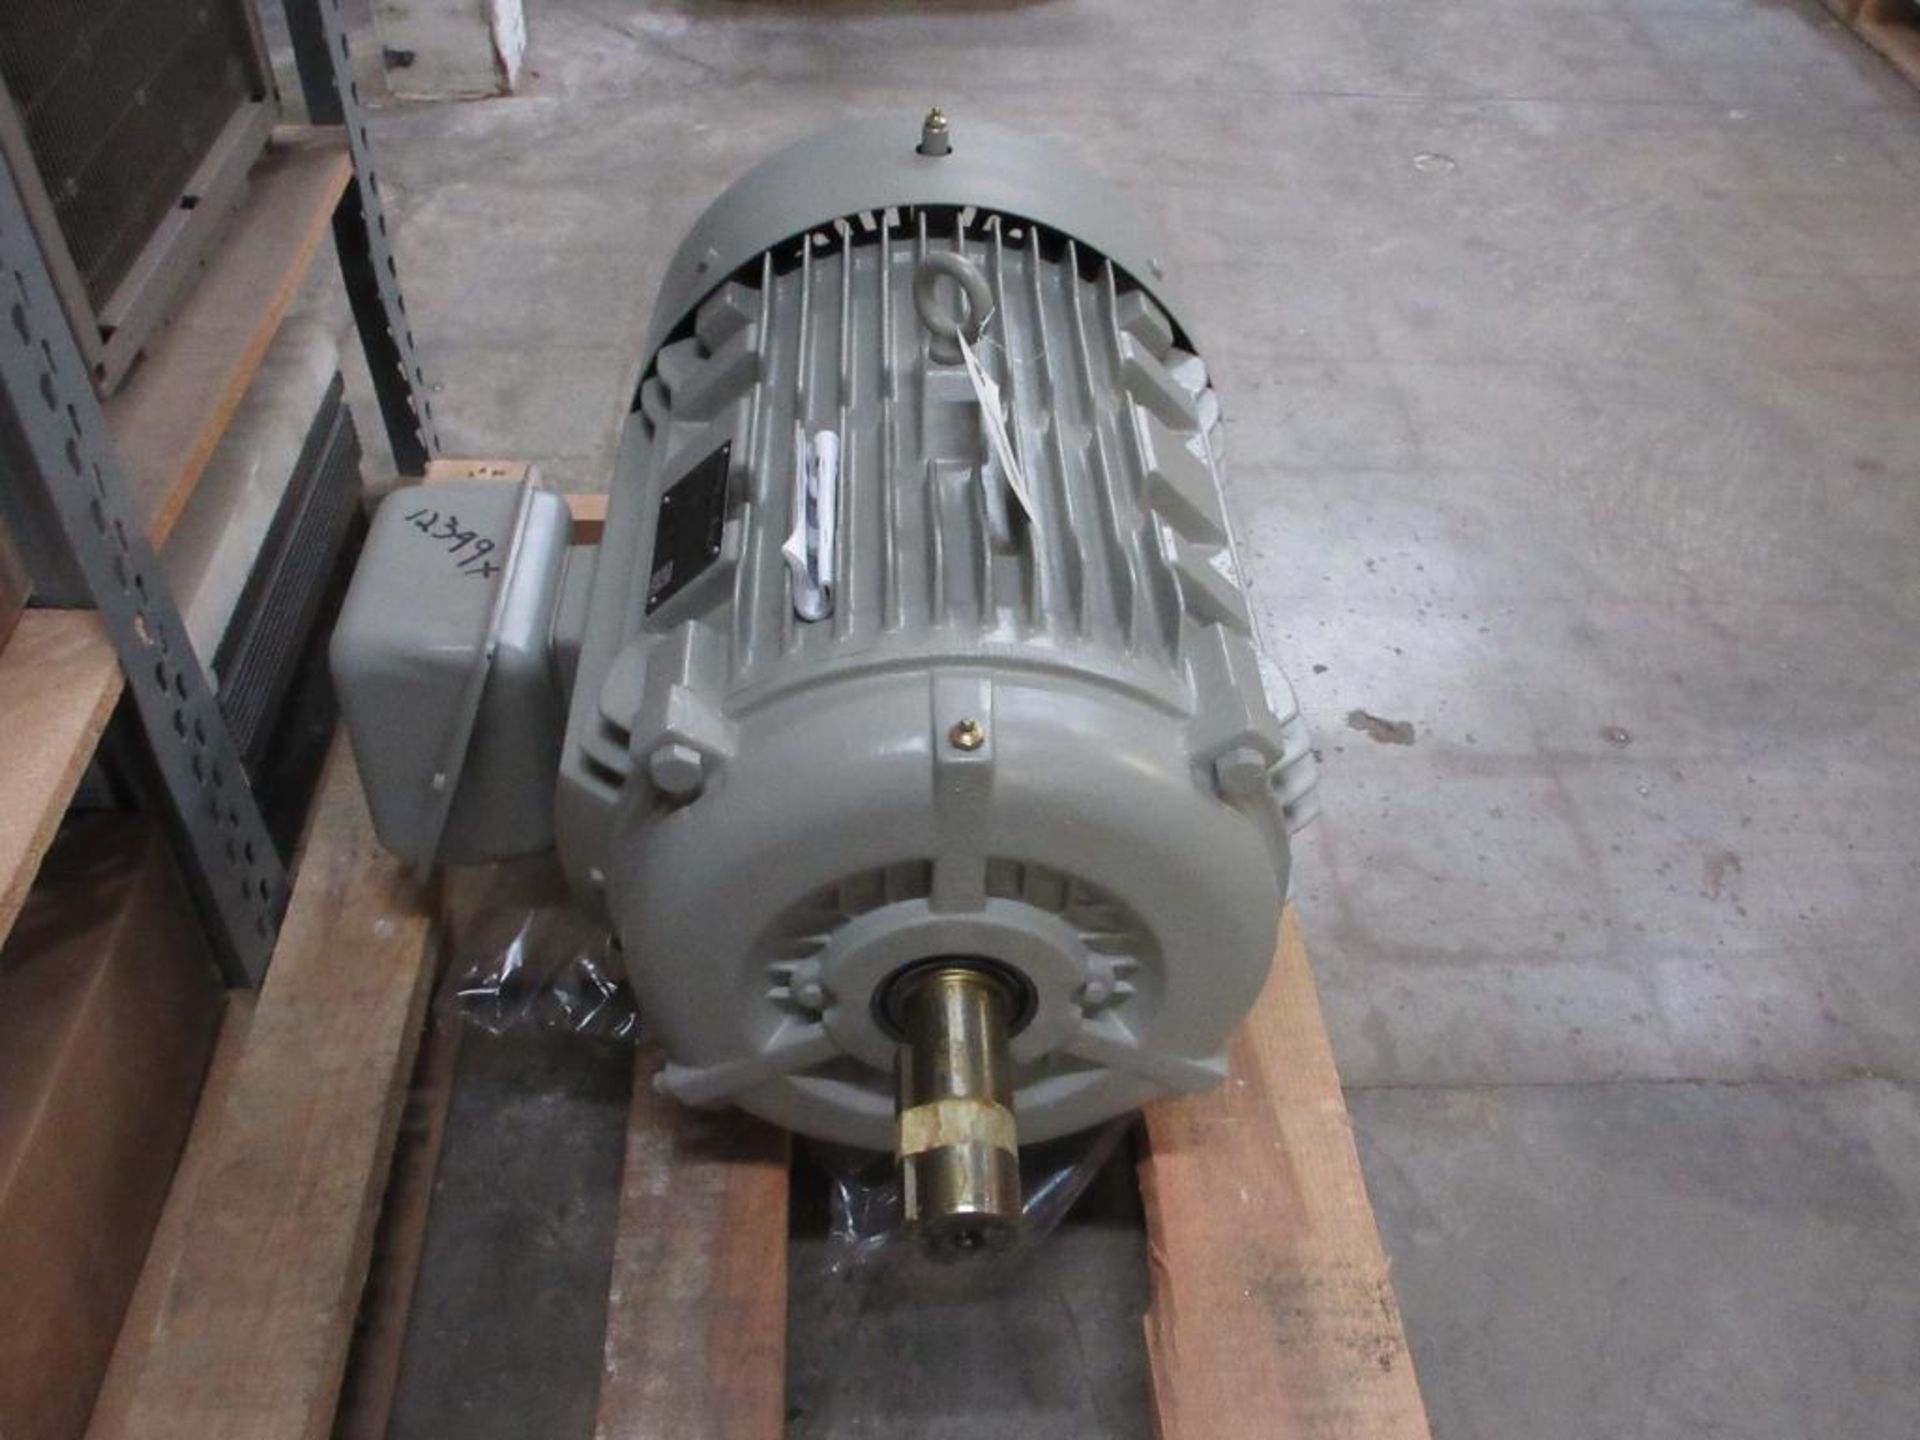 SIEMENS MOTOR 40HP 3 PHASE 1800RPM FRAME 324T P/N 1LE22213AB116AA3 TYPE GP100 (THIS LOT IS FOB CAMAR - Image 3 of 9